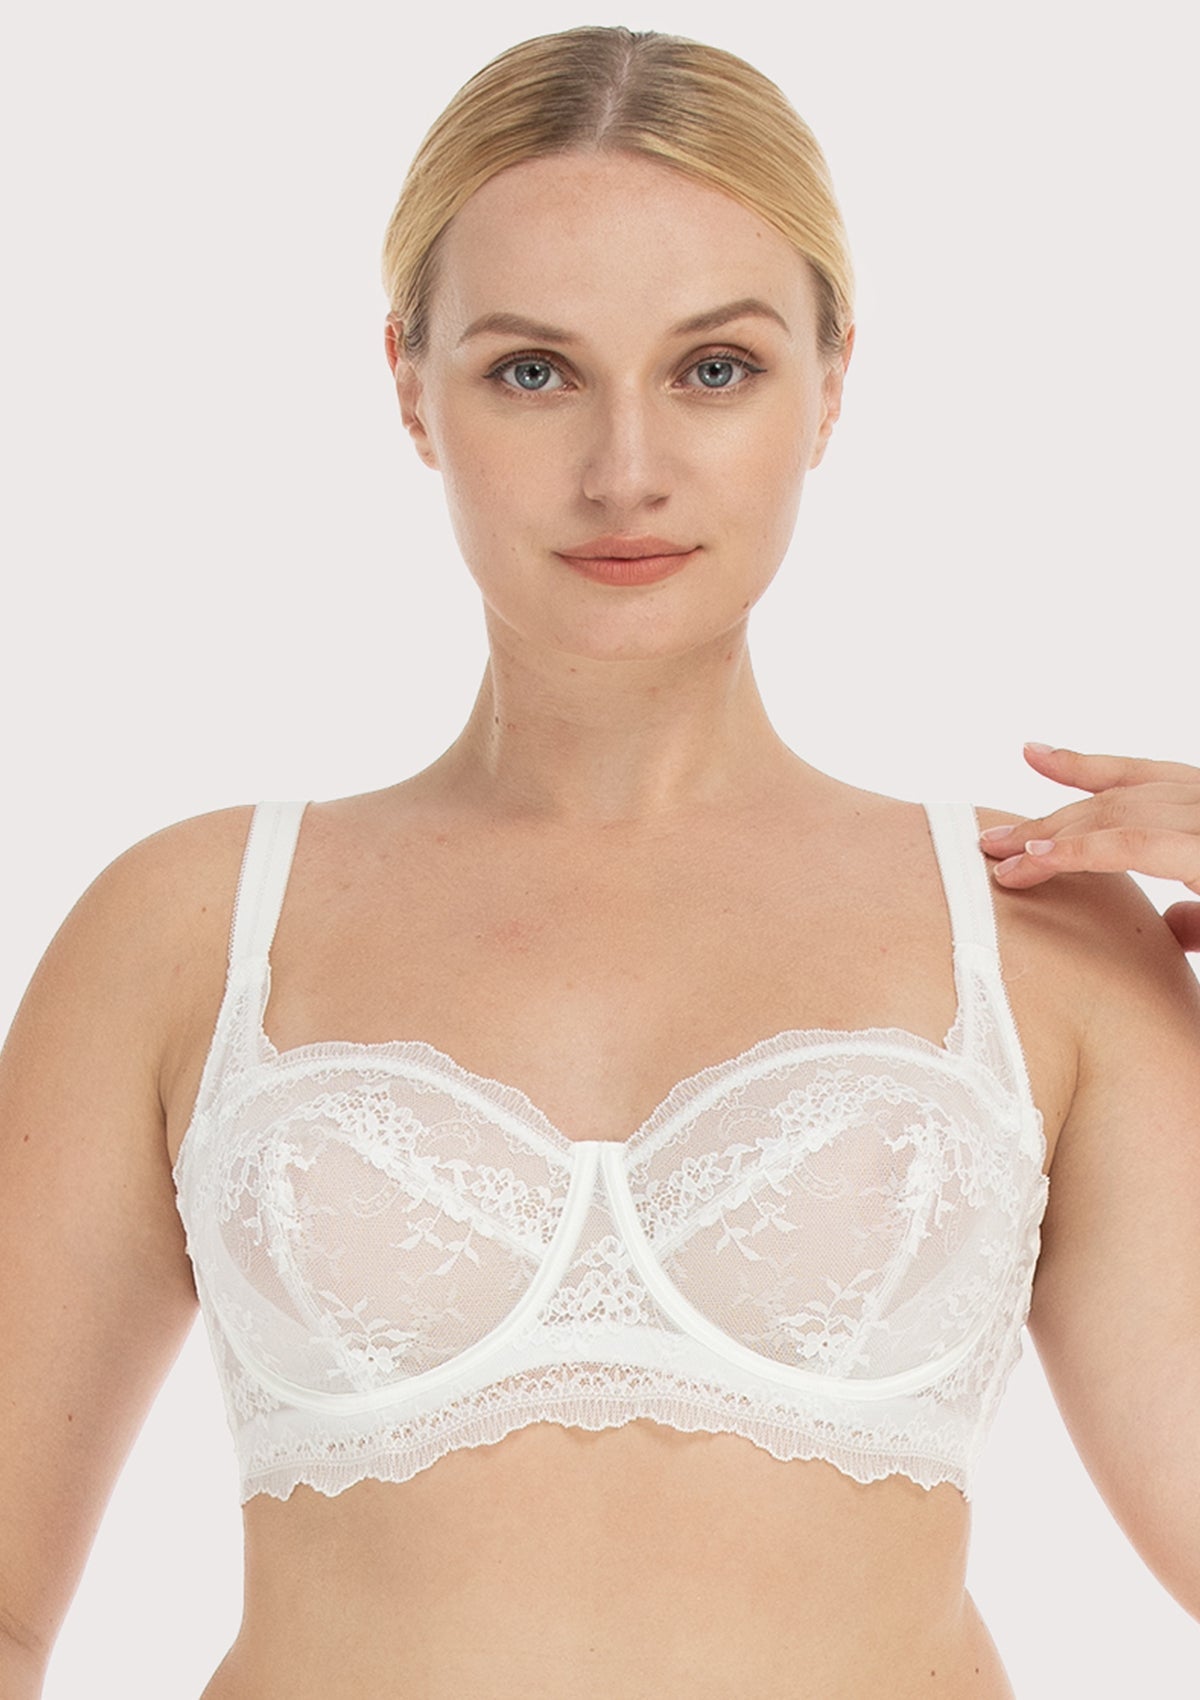 HSIA I Do Floral Lace Bridal Balconette Beautiful Bra For Special Day - Pink / 38 / DDD/F